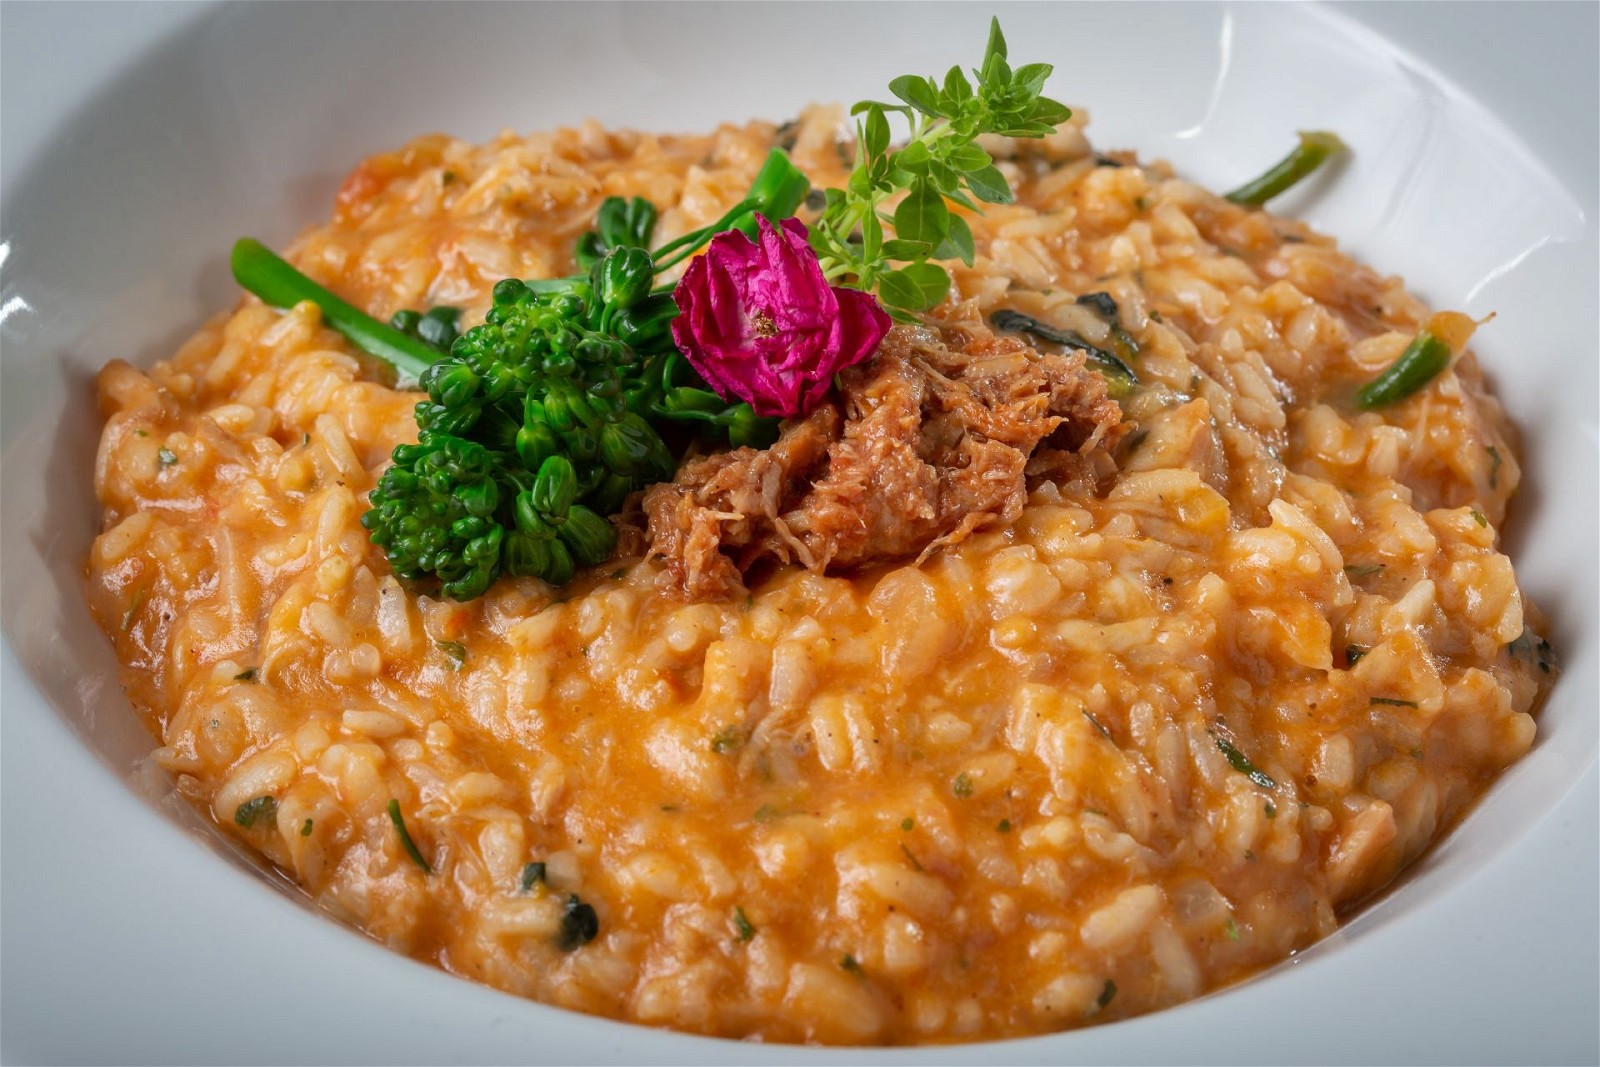 Italy's Best Risotto Restaurants on a Budget: A City-by-City Guide